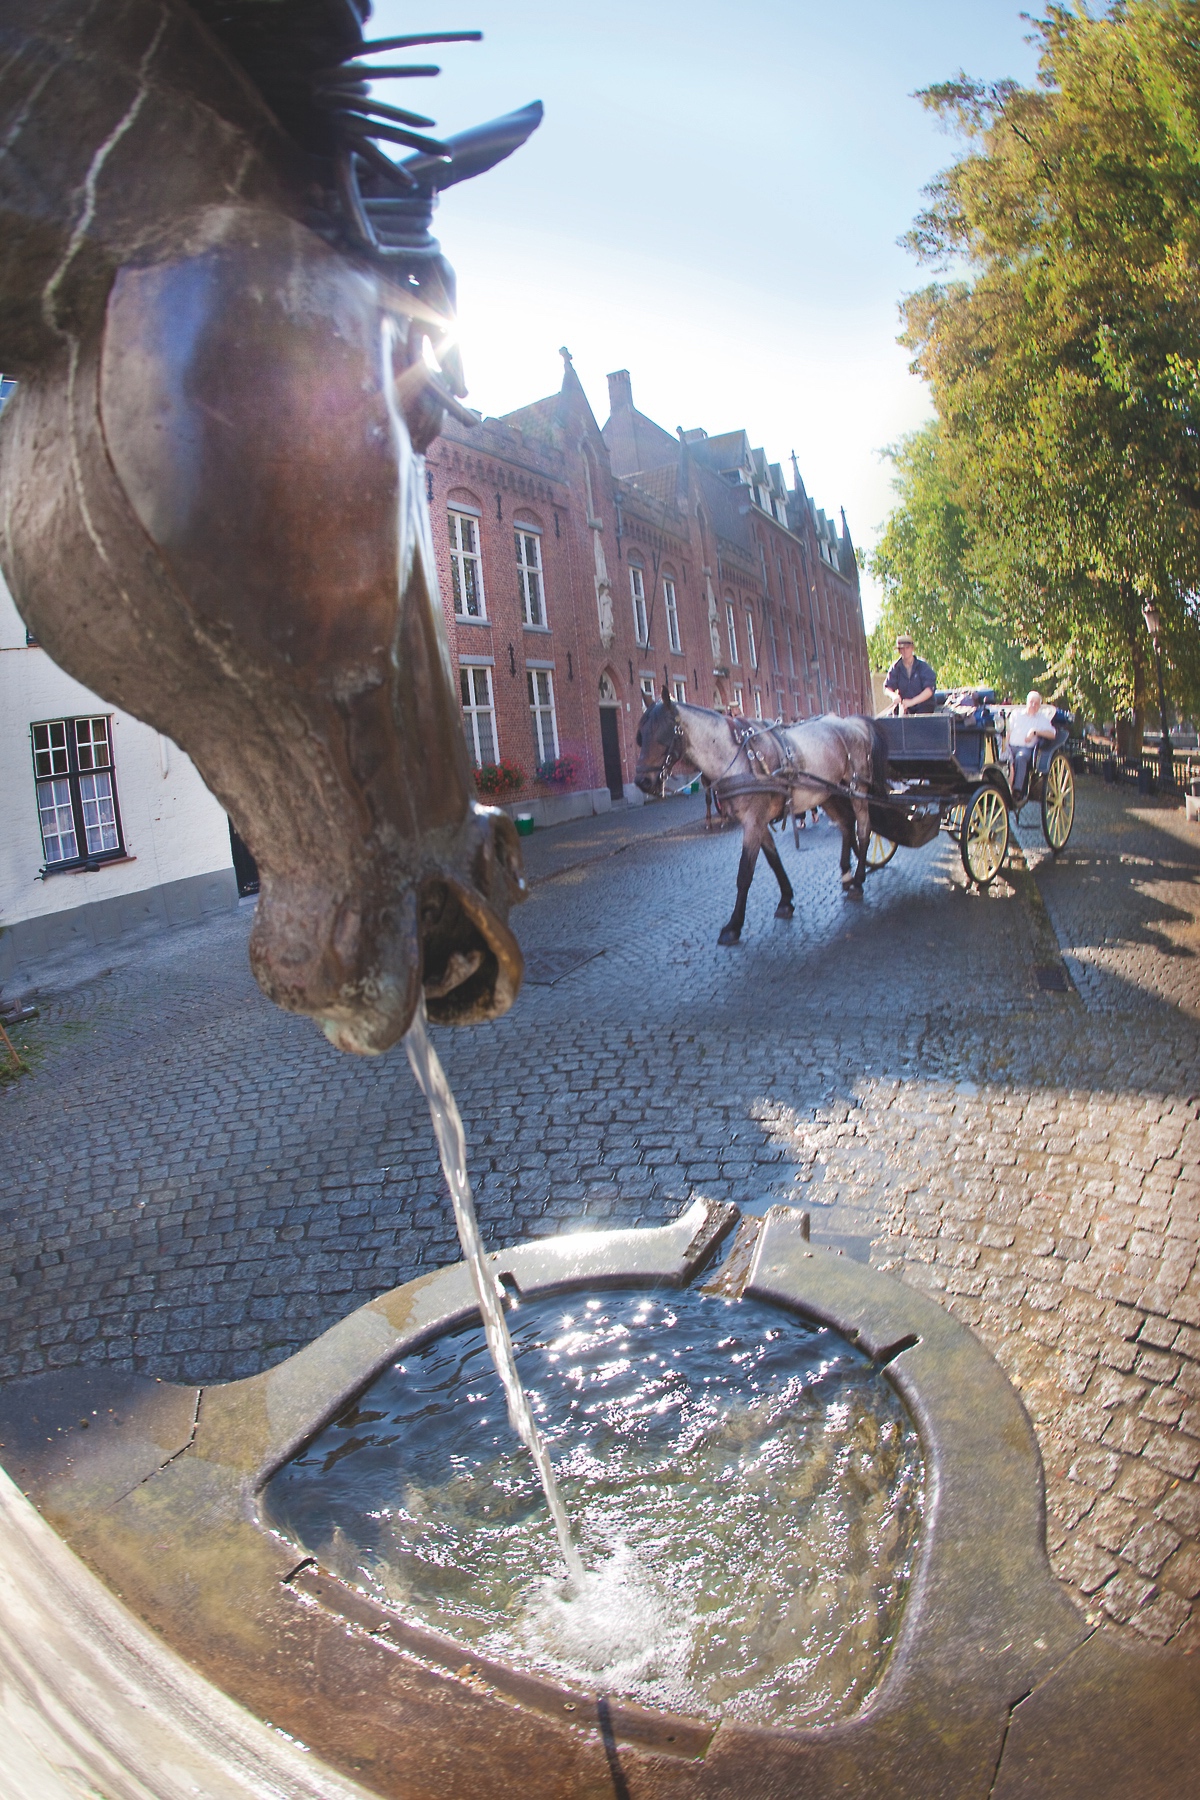 Wijngaardplein, with a fountain in the shape of a horse's head from which water flows into a basin, and a horse with a carriage in the background